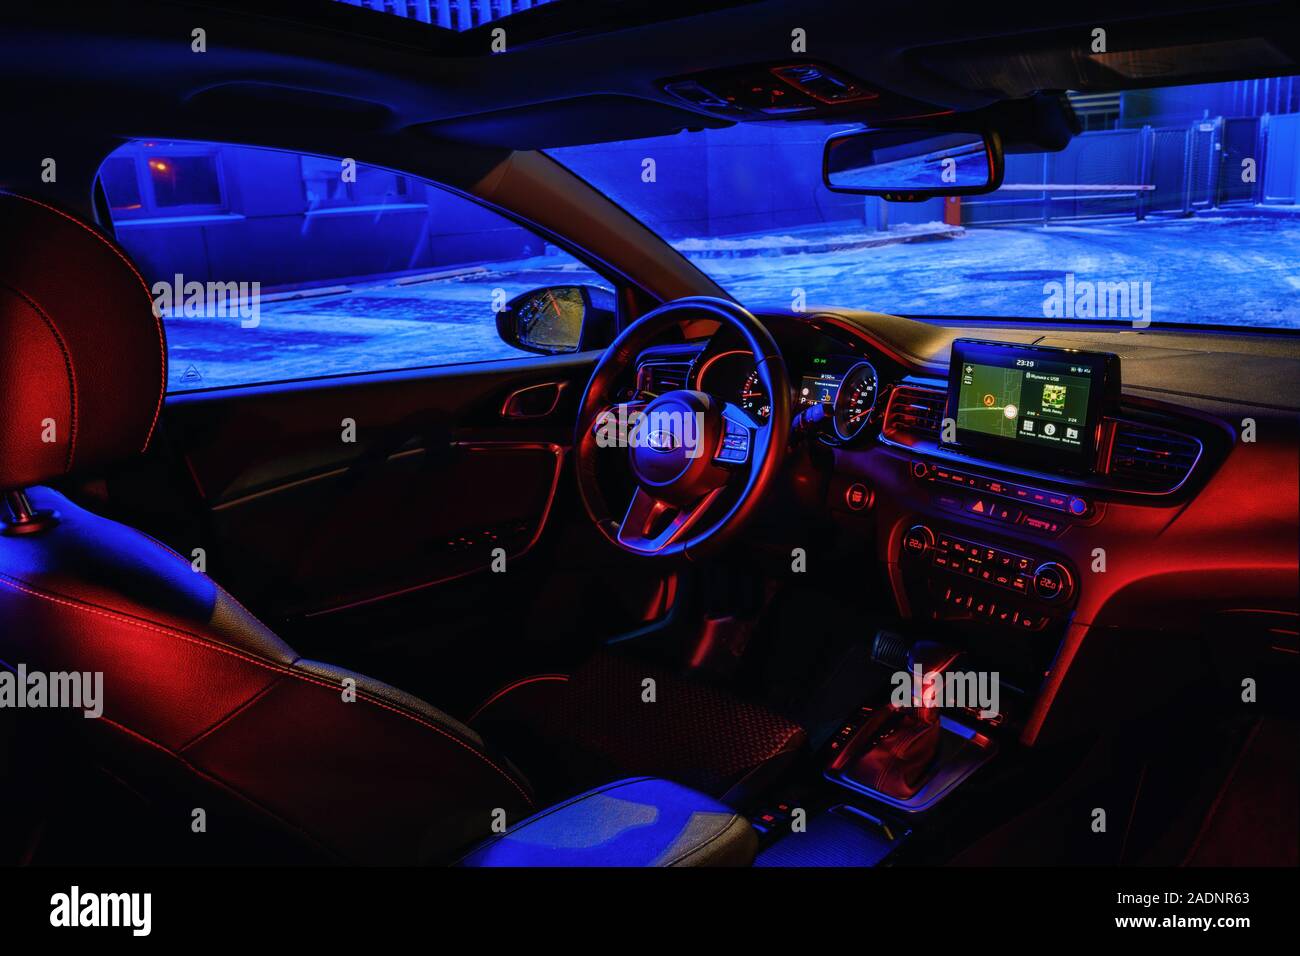 Minsk, Belarus - November 26, 2019: Interior of Kia Ceed 2018 car on in  night city with neon color lights Stock Photo - Alamy